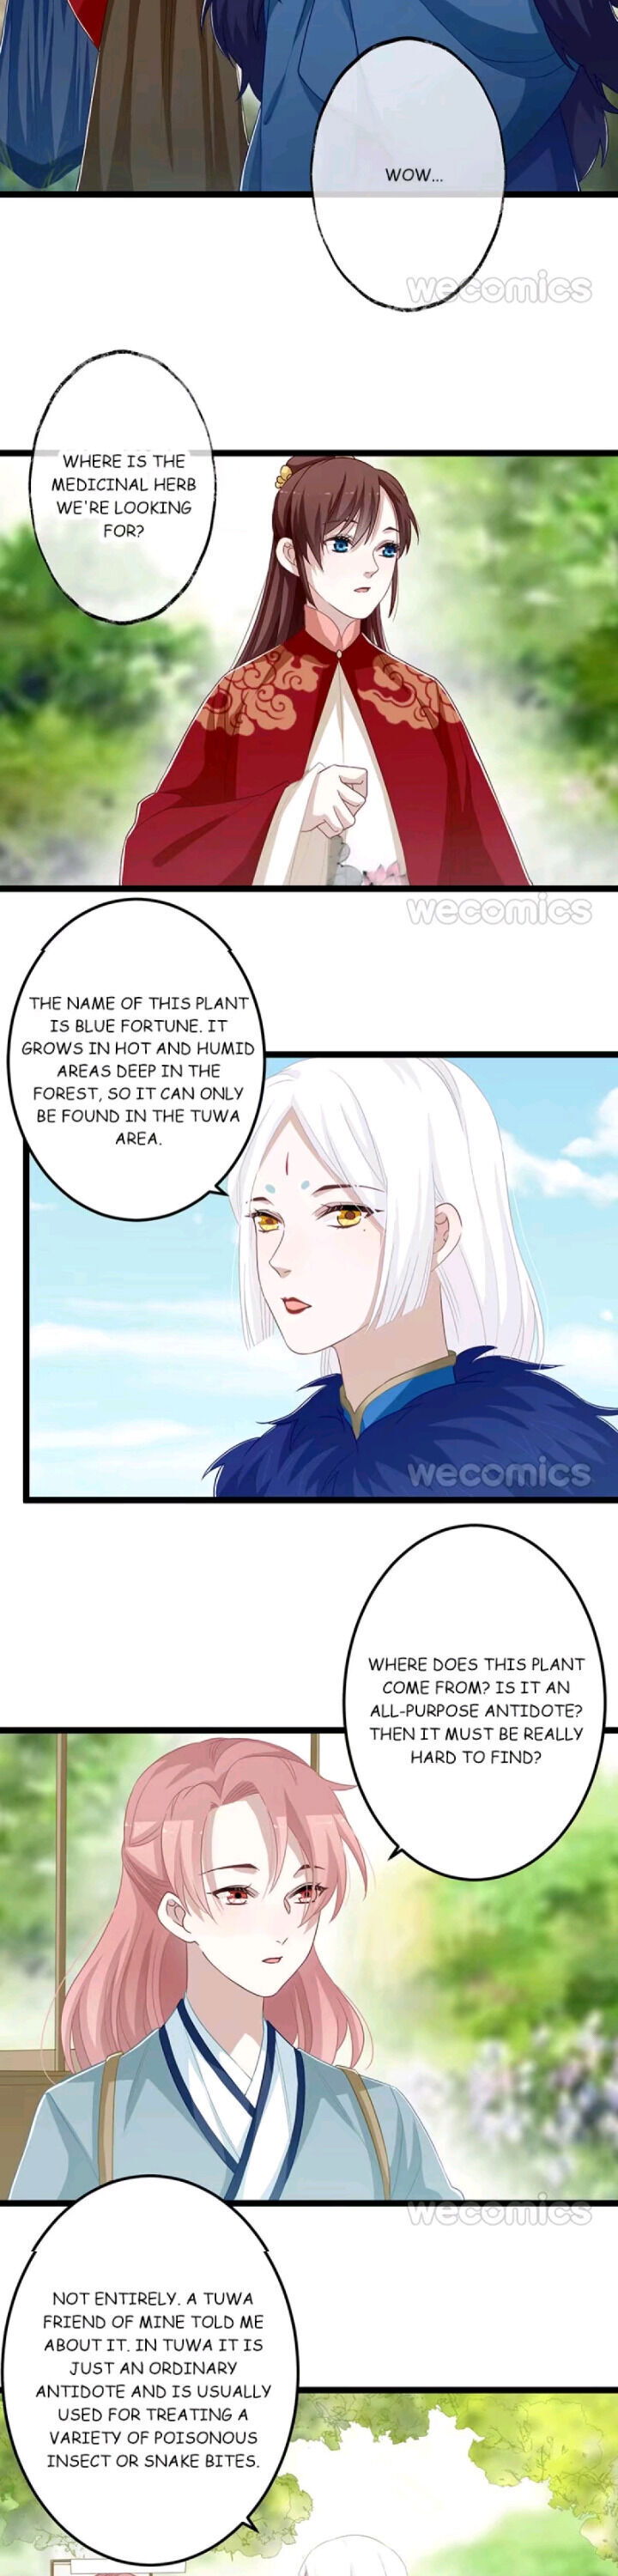 Curse of Loulan: The Tyrant Bestows Favor on Me Chapter 99 page 16